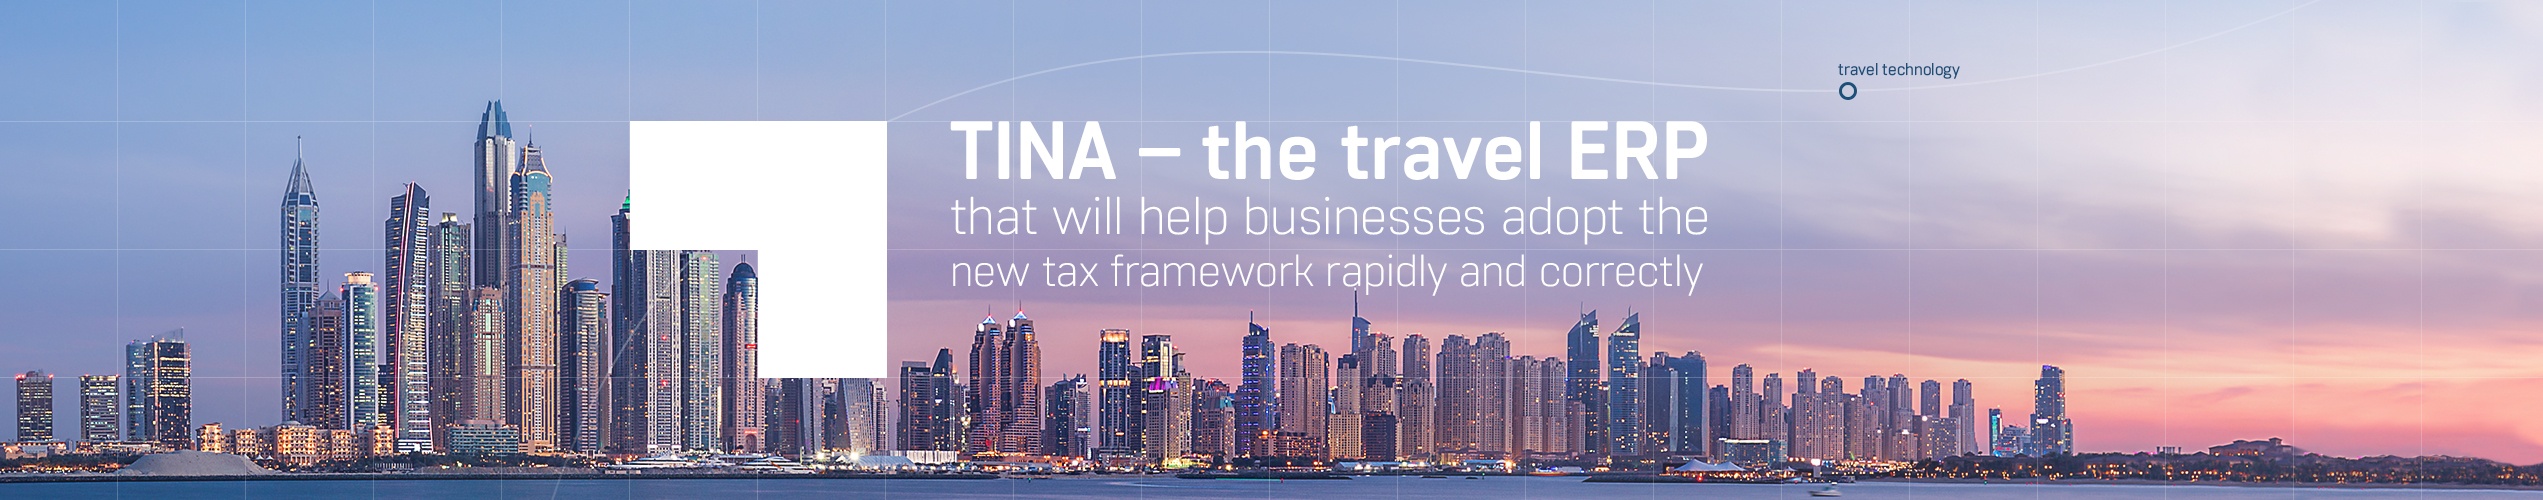 TINA travel ERP covers new introduction of VAT